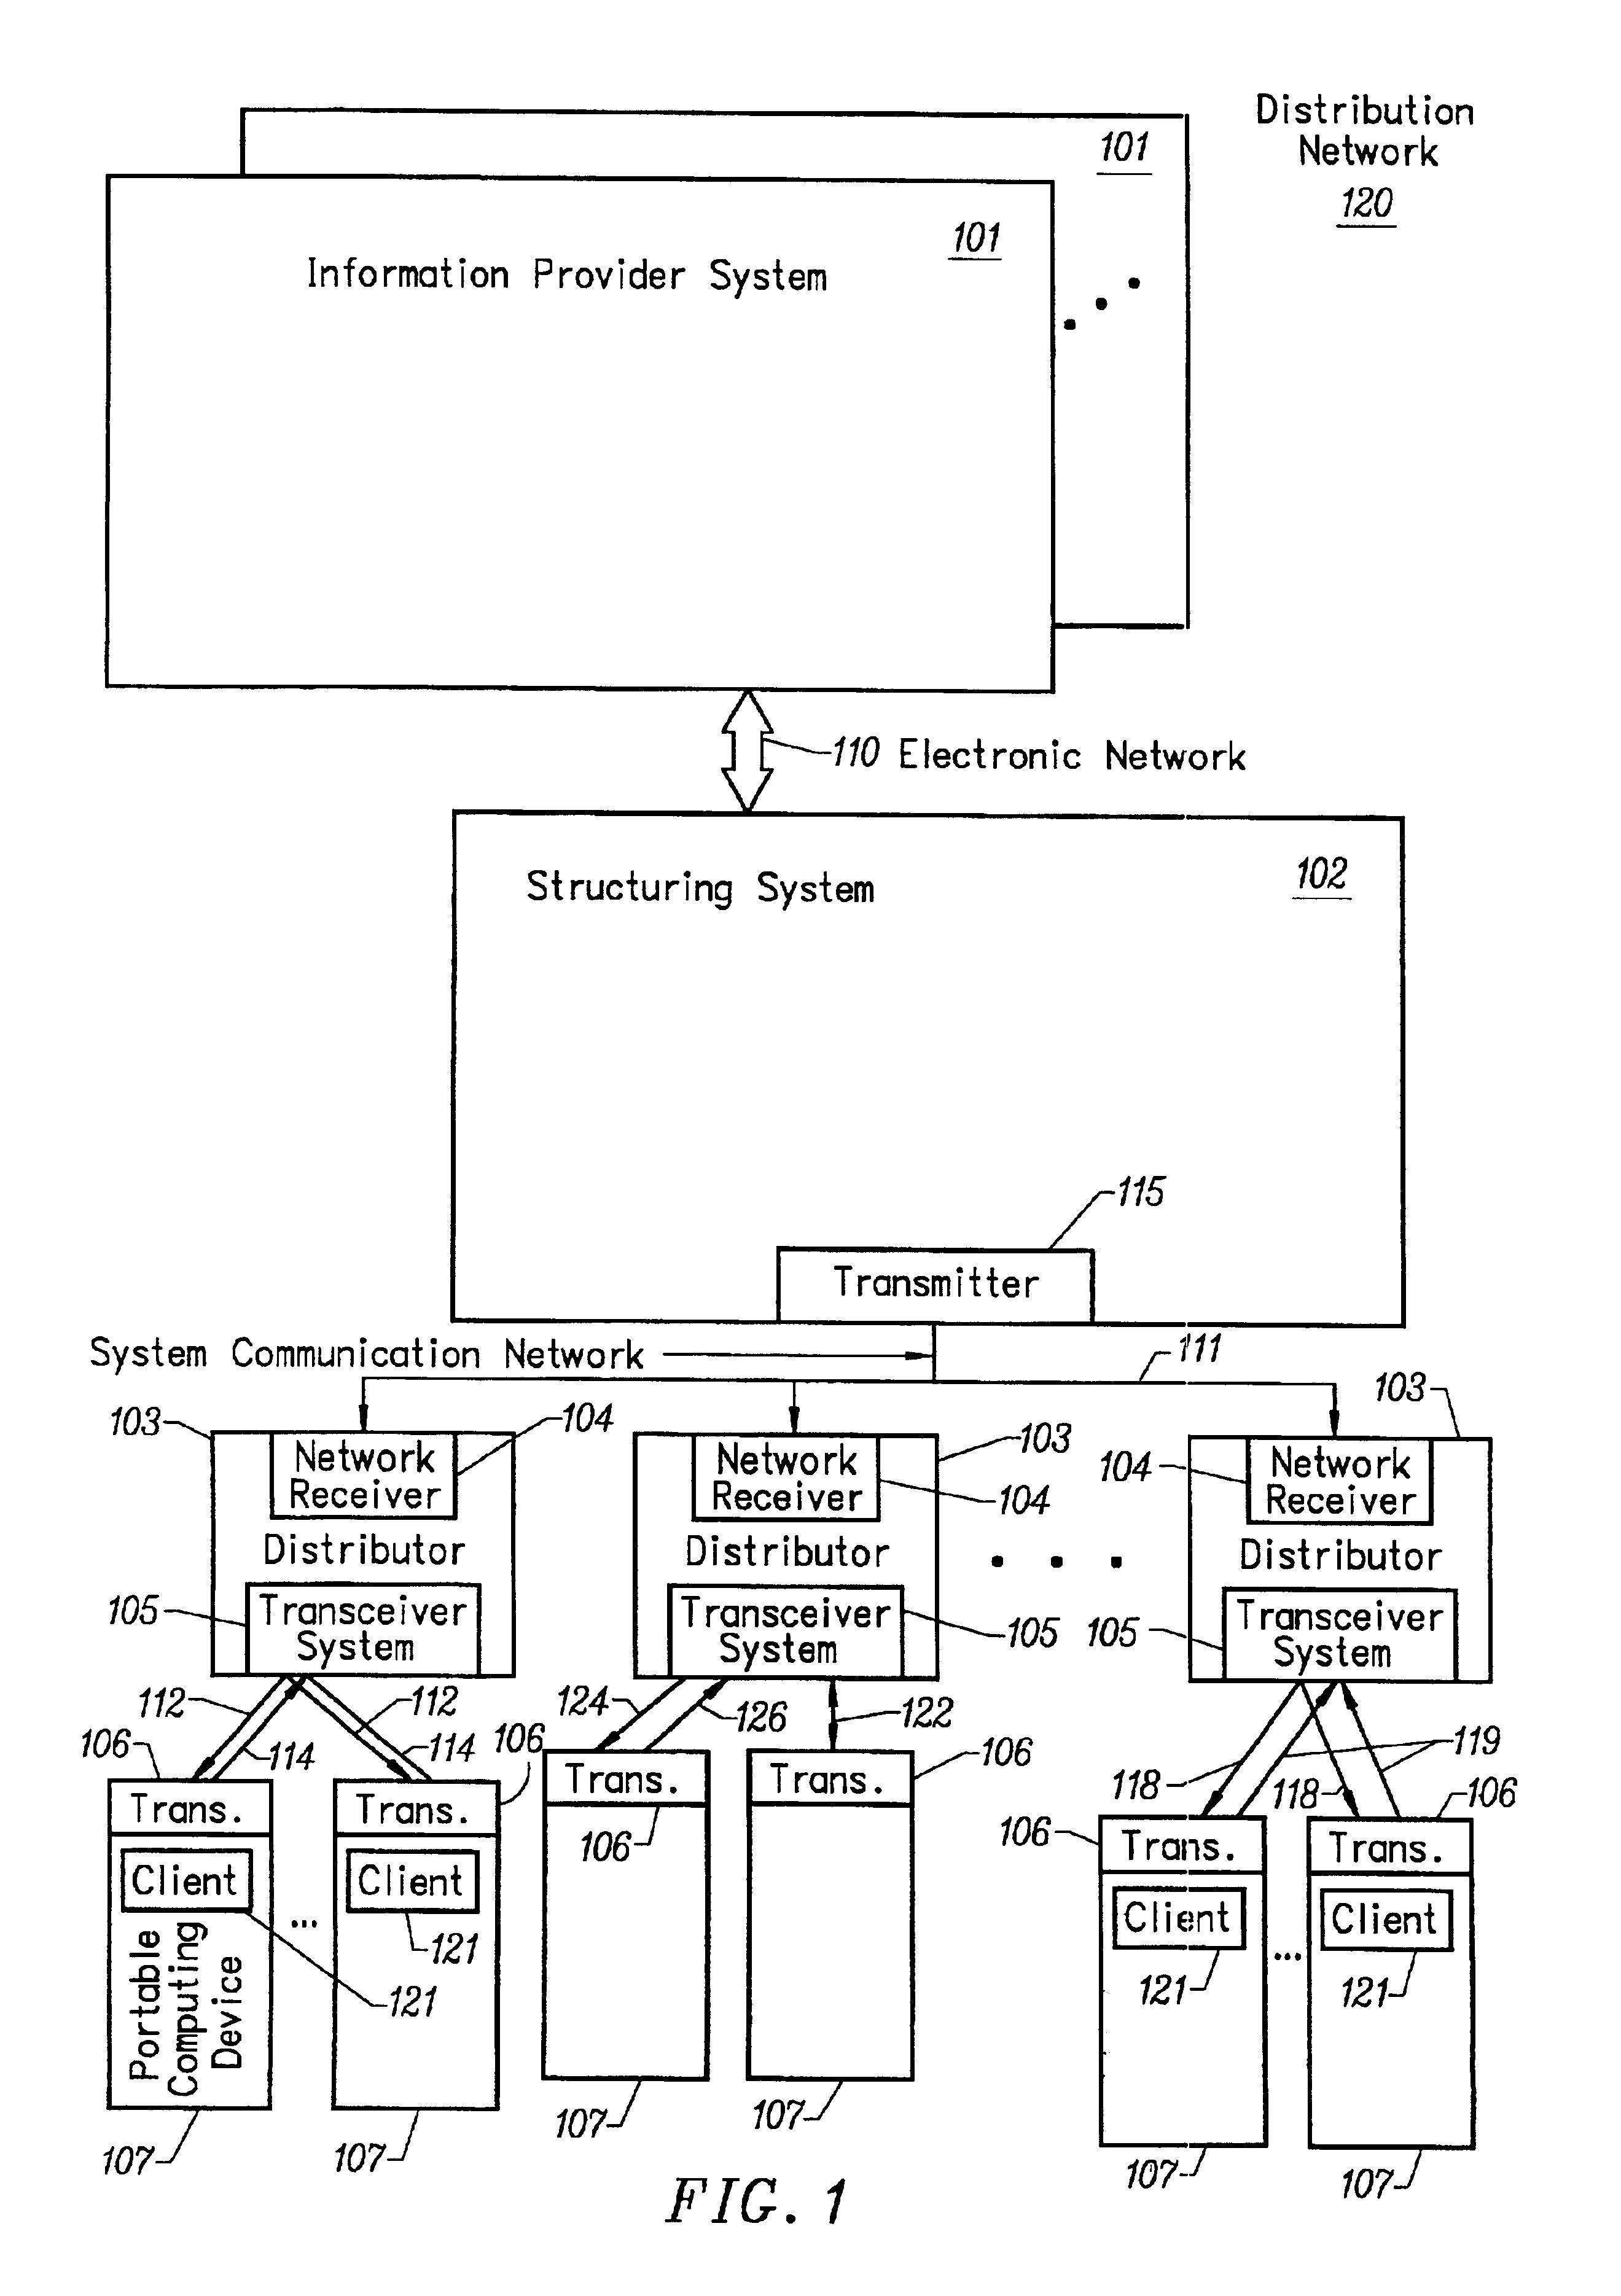 Apparatus and method for communicating information to portable computing devices